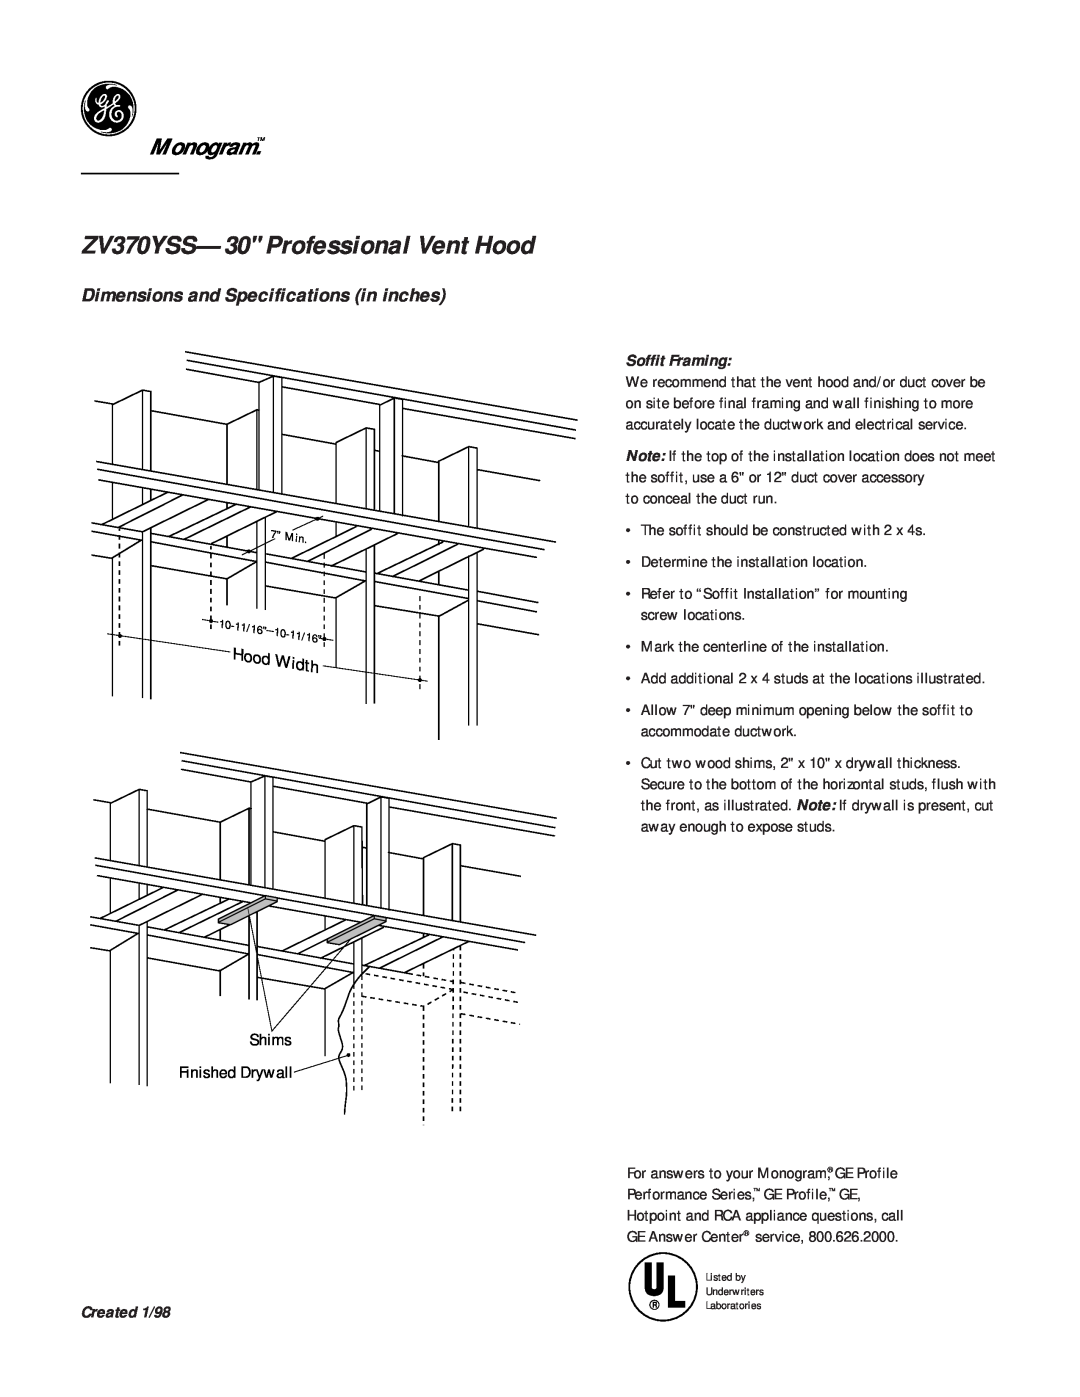 GE ZV370YSS--30 dimensions Width, Shims Finished Drywall, Soffit Framing, ZV370YSS-30 Professional Vent Hood, Monogram 